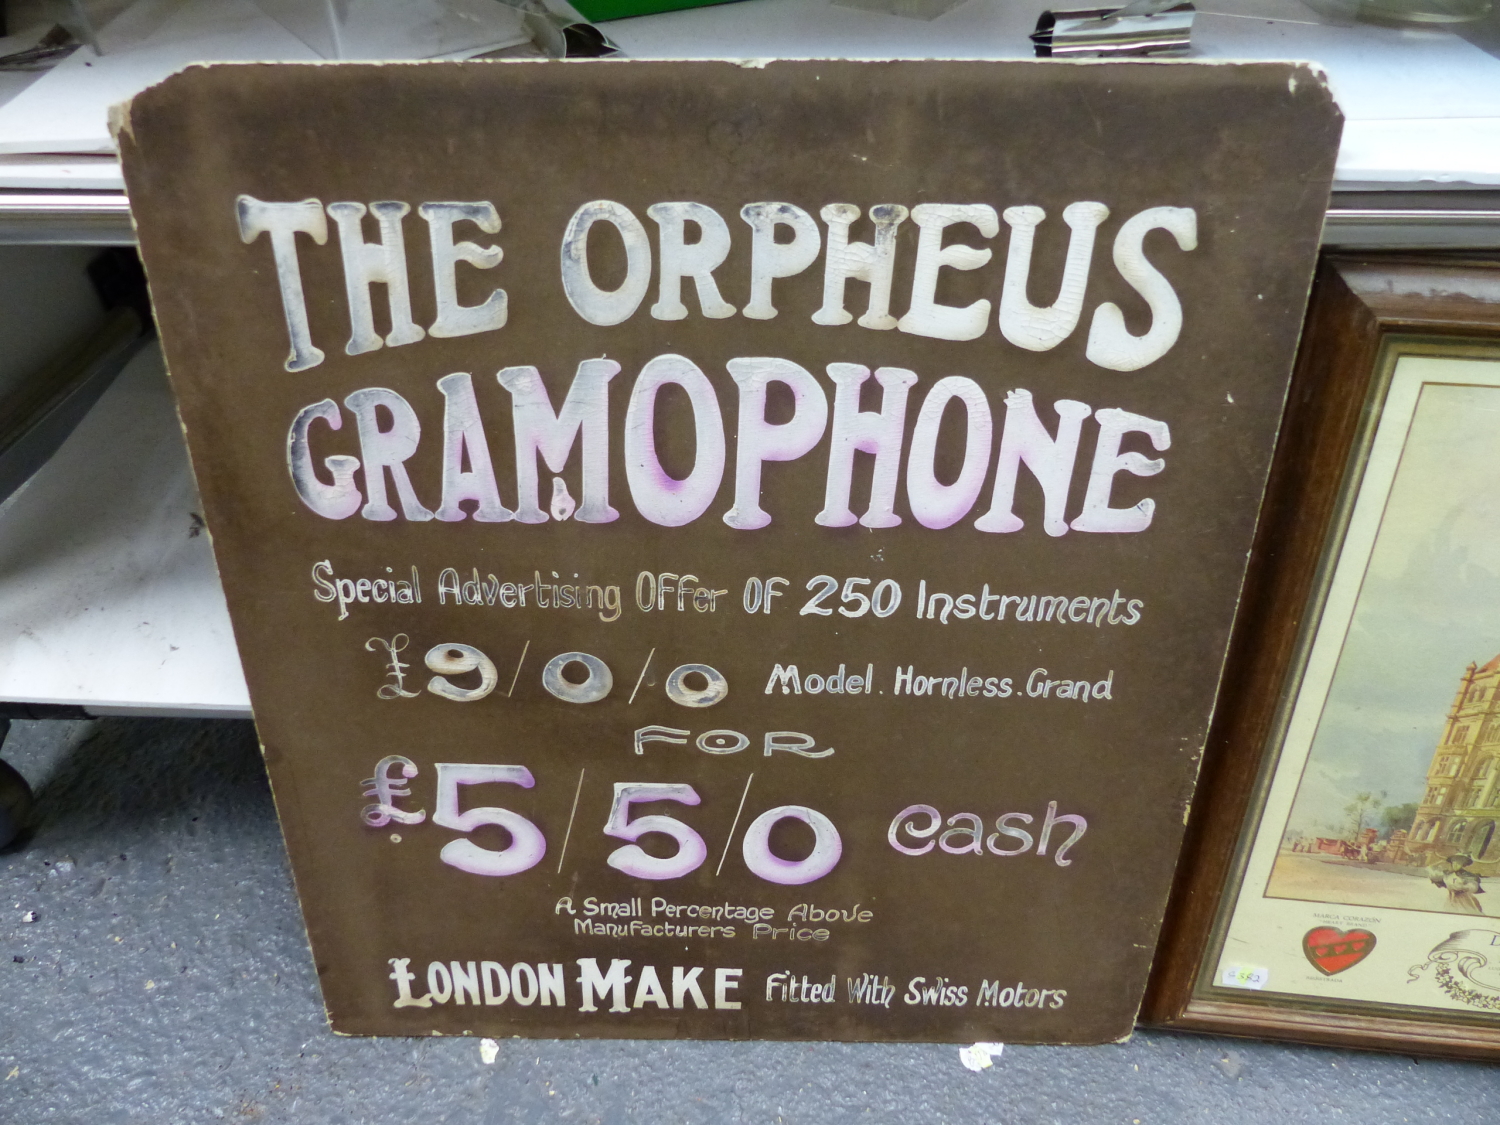 THE ORPHEUS GRAMOPHONE, A PAINTED CARD ADVERTISEMENT FOR 250 INSTRUMENTS AT A DISCOUNTED PRICE OF £ - Image 8 of 9